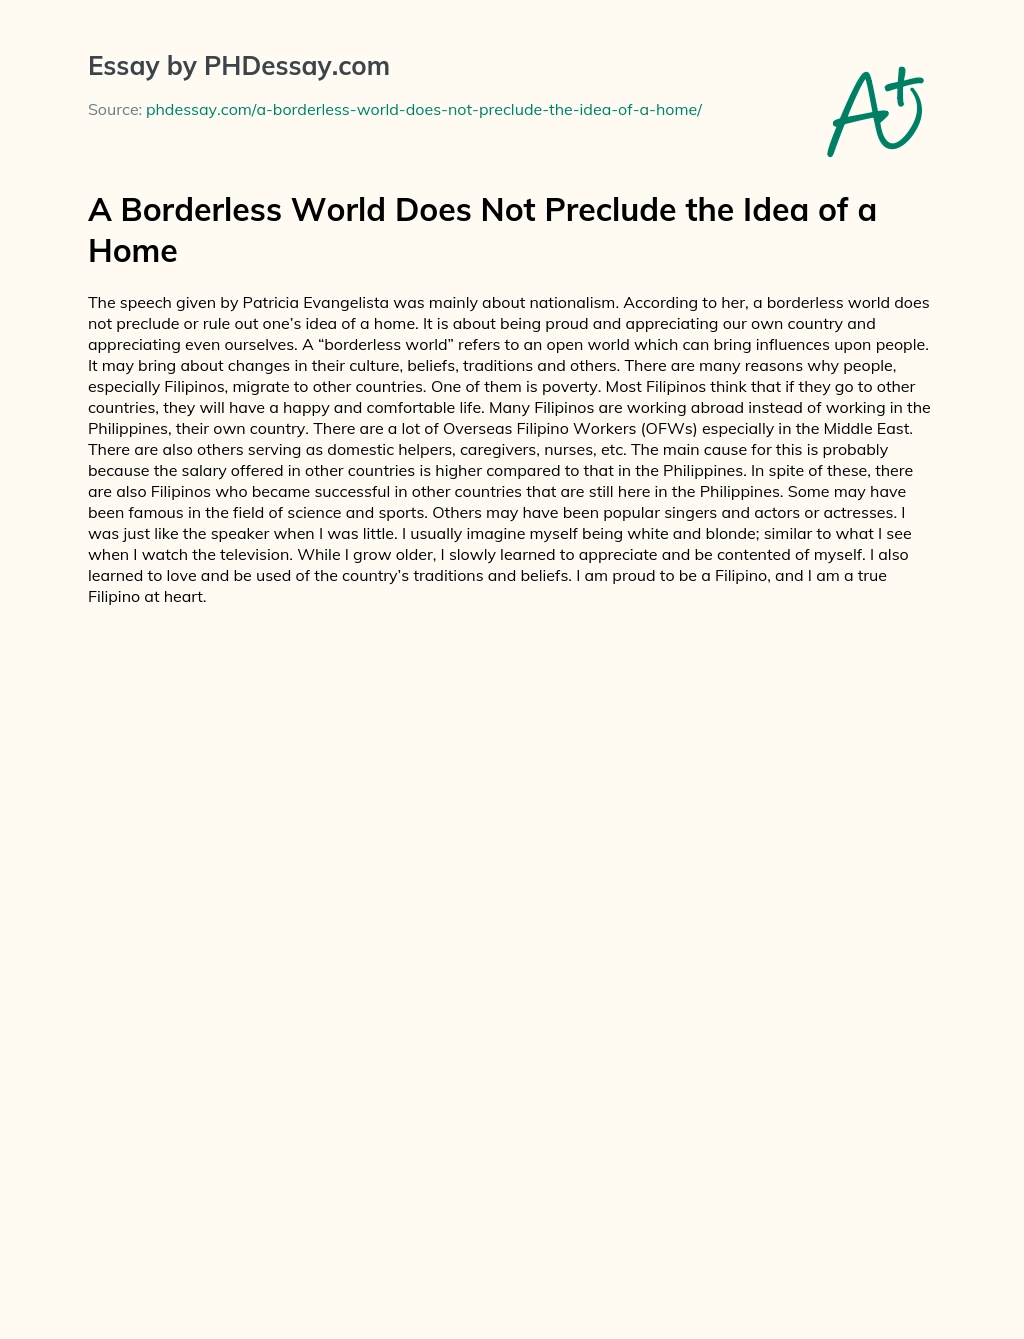 A Borderless World Does Not Preclude the Idea of a Home essay